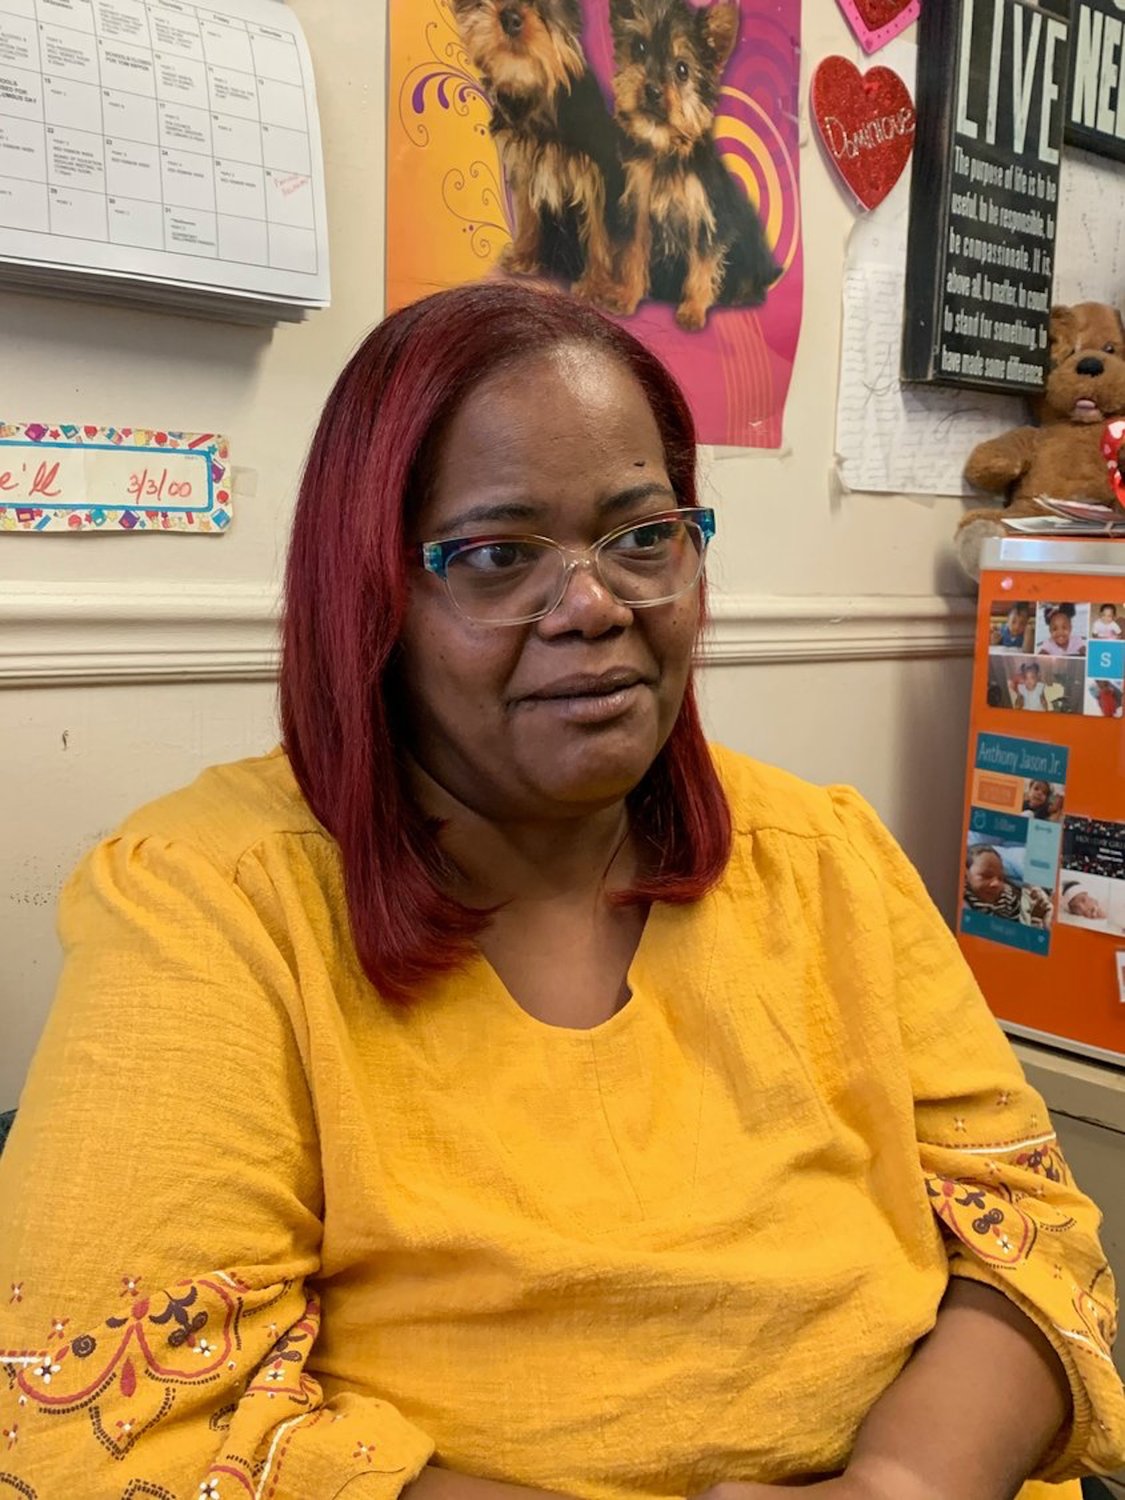 Sharon Sheppard, assistant director of the MLK Jr. Center, continues to provide food and resources to others while battling cancer herself.